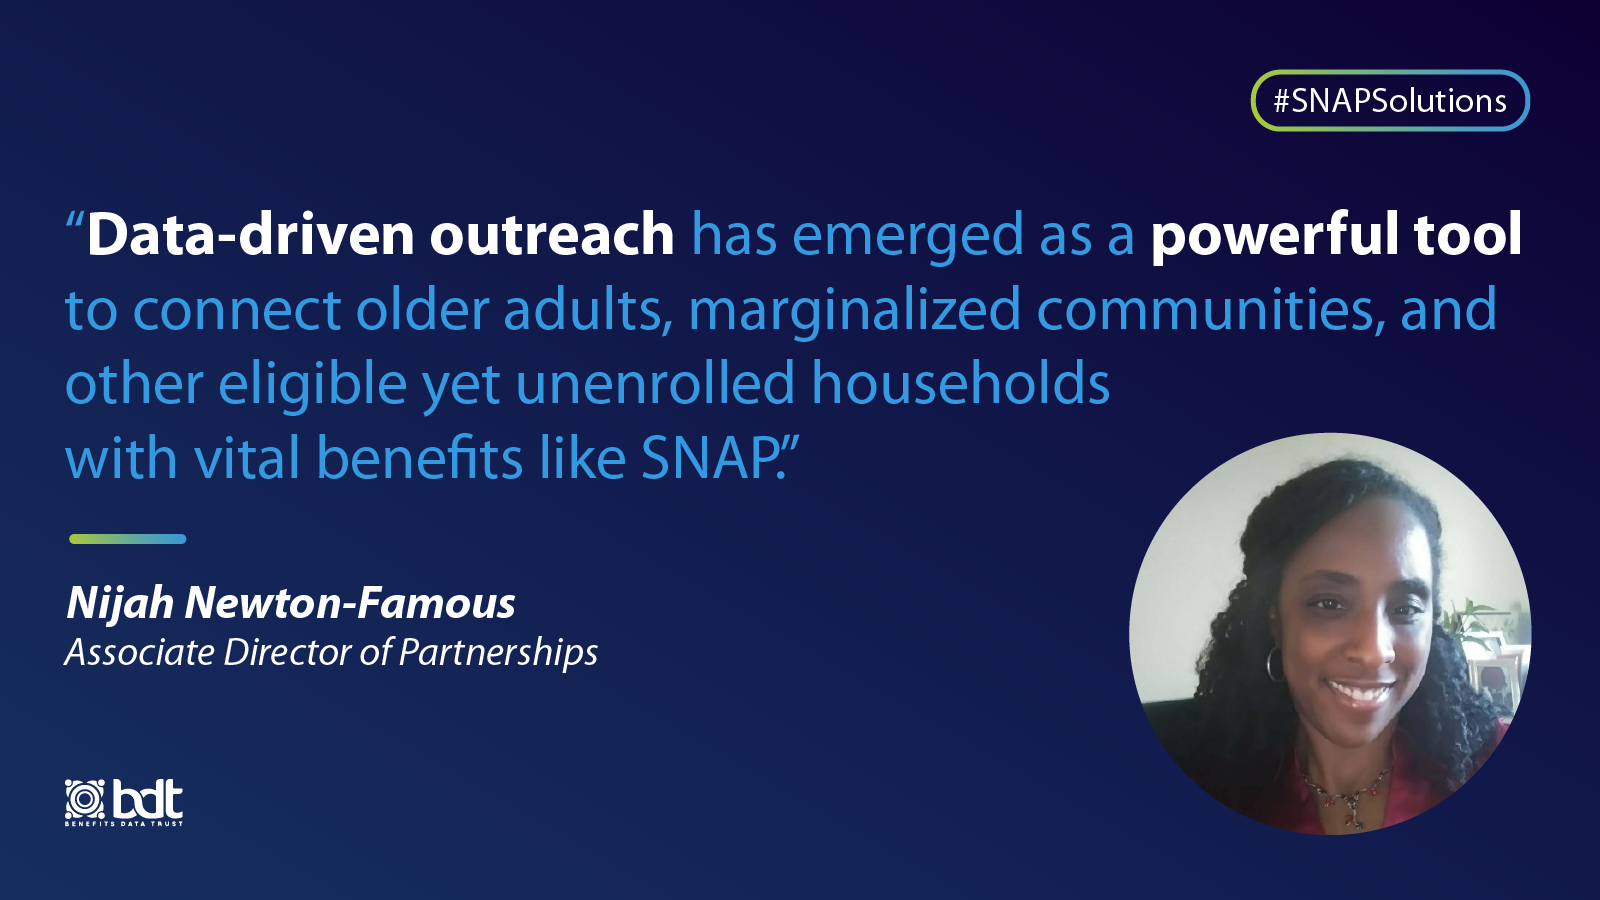 "Data-driven outreach has emerged as a powerful tool to connect older adults, marginalized communities, and other eligible yet unenrolled households with vital benefits like SNAP." – Nijah Newton-Famous